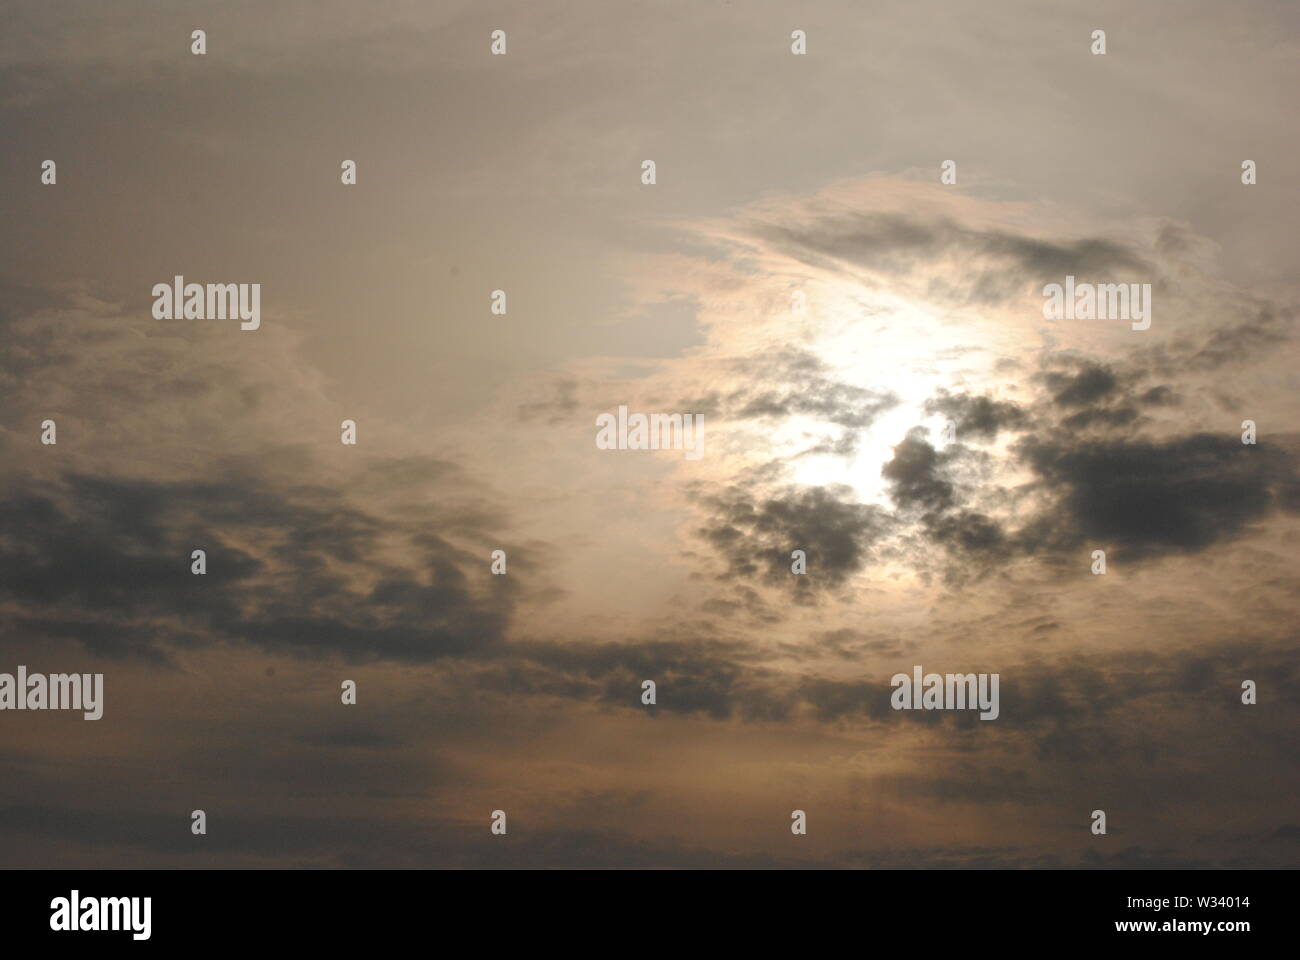 Hazy diffuse sun shining behind  grey clouds in a fuzzy  abstract sky Stock Photo